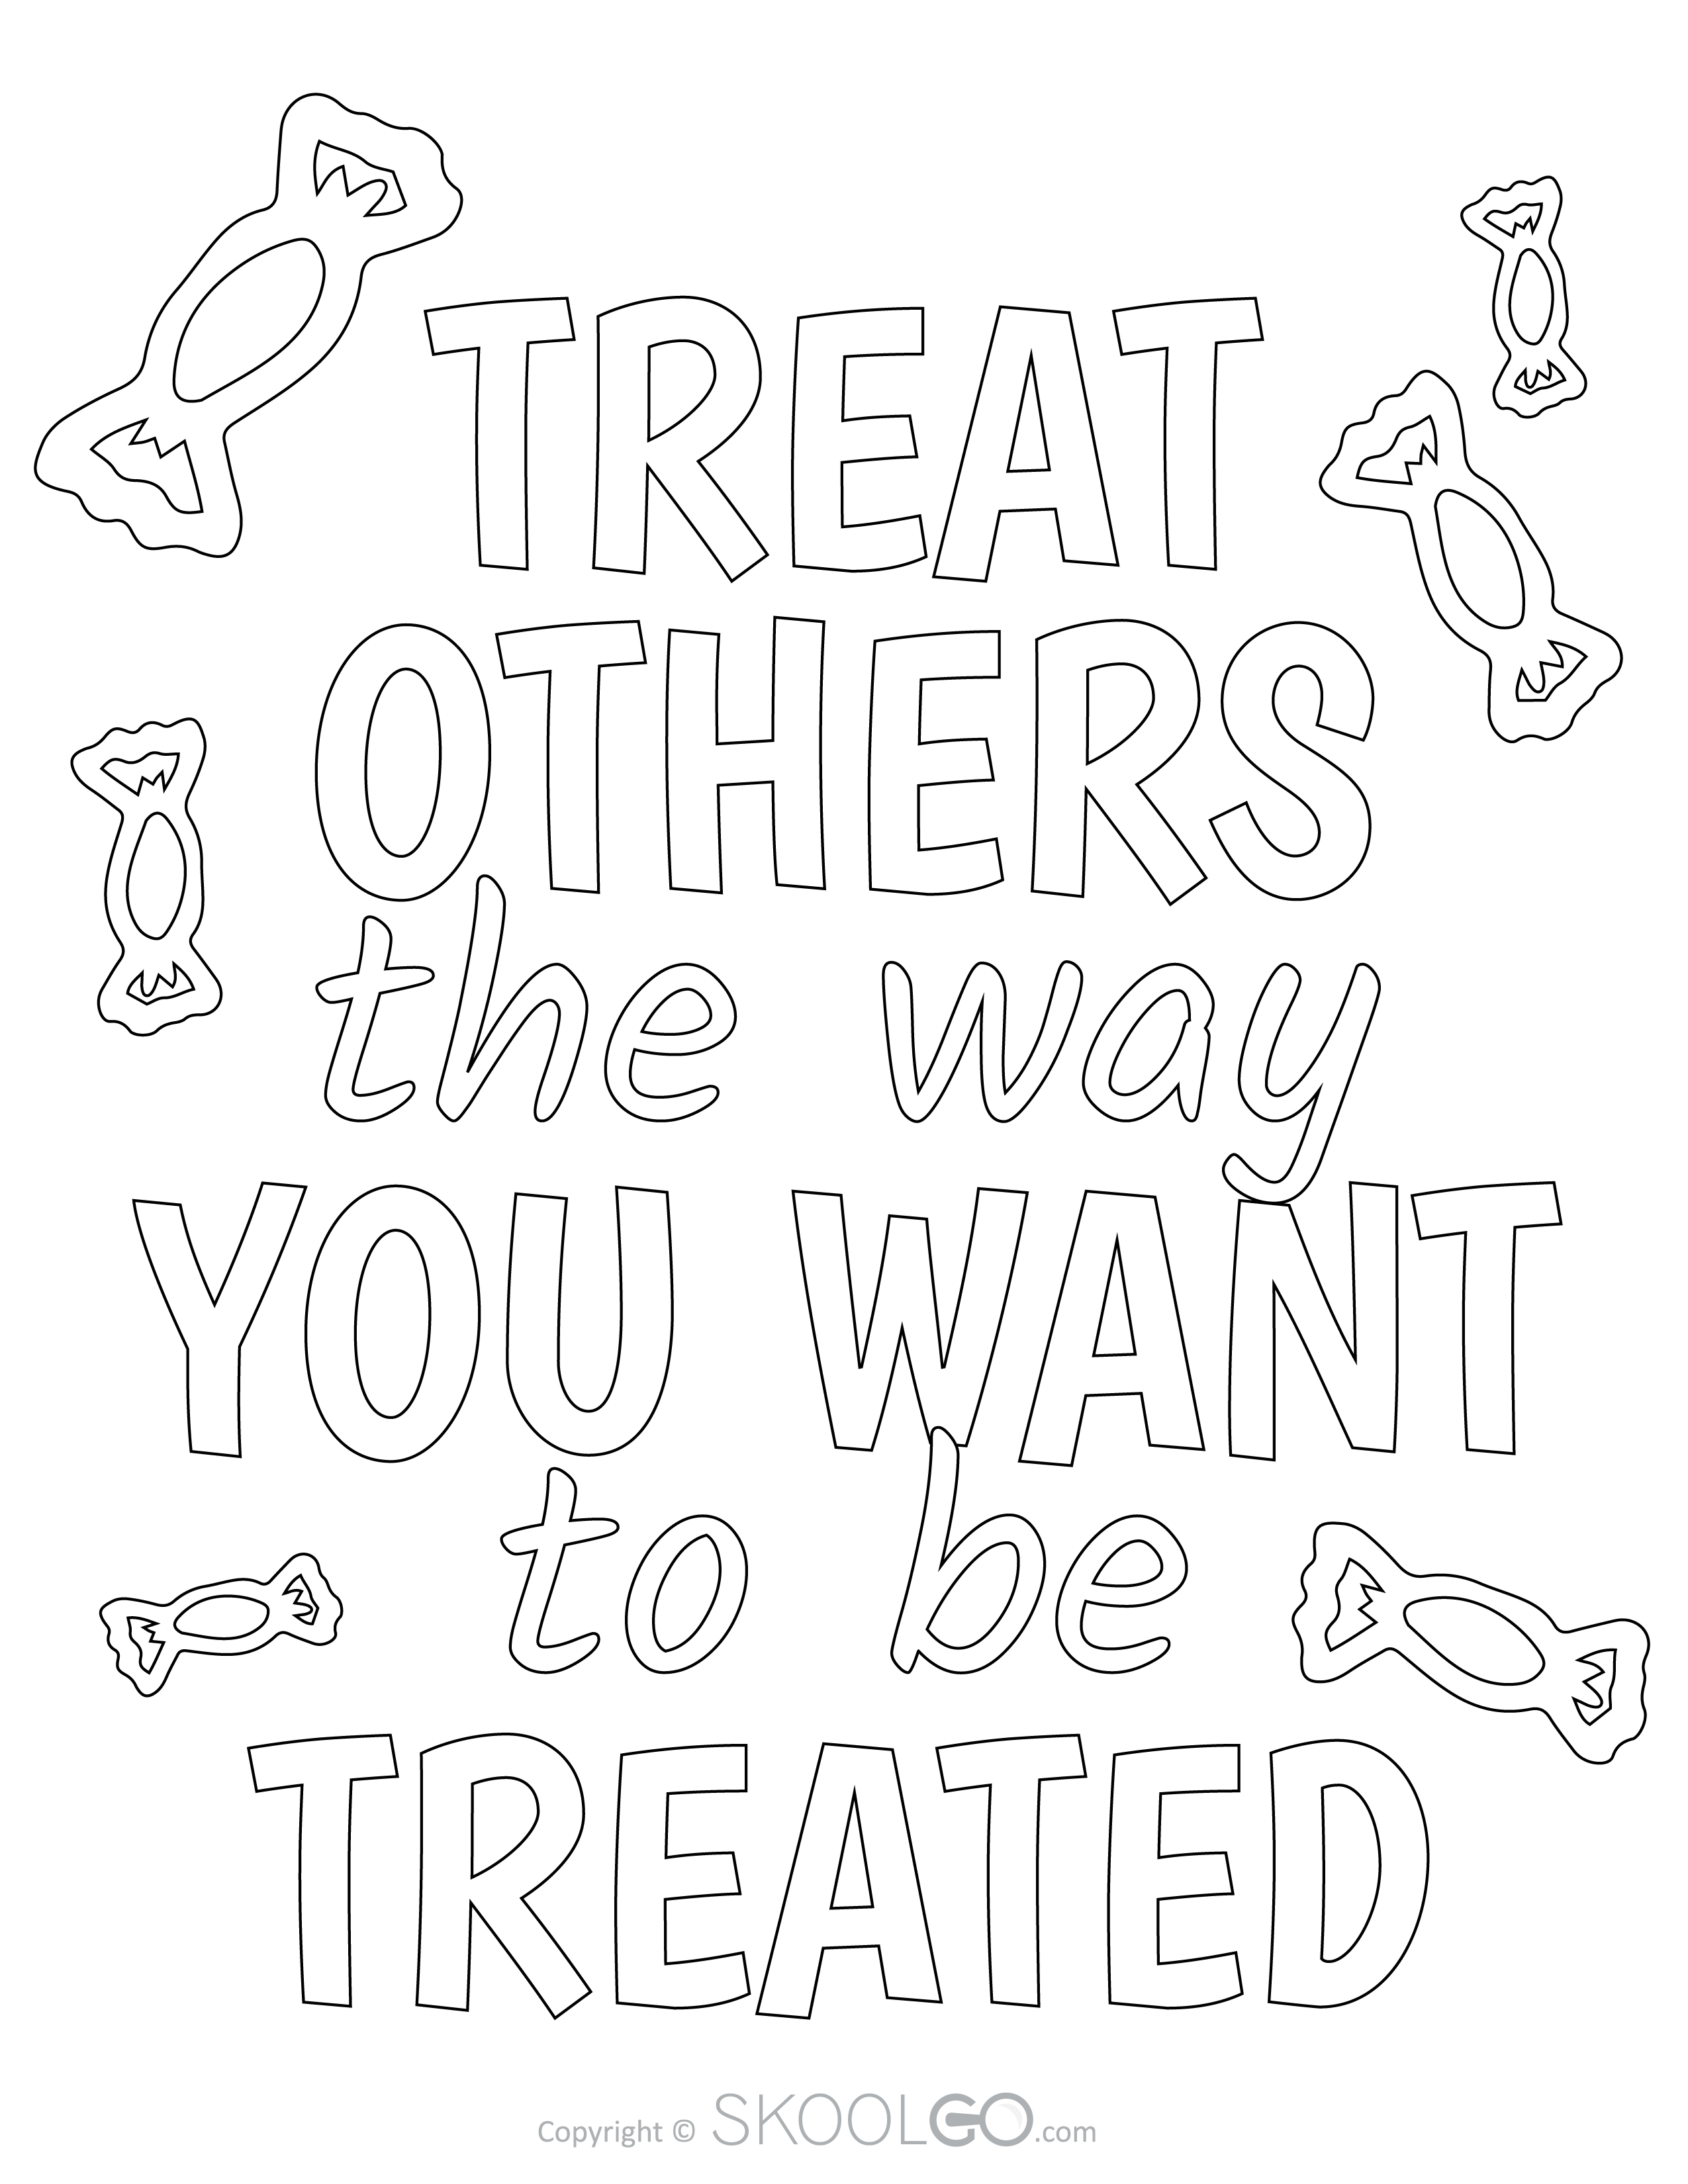 Treat Others The Way You Want To Be Treated - Free Coloring Version Poster